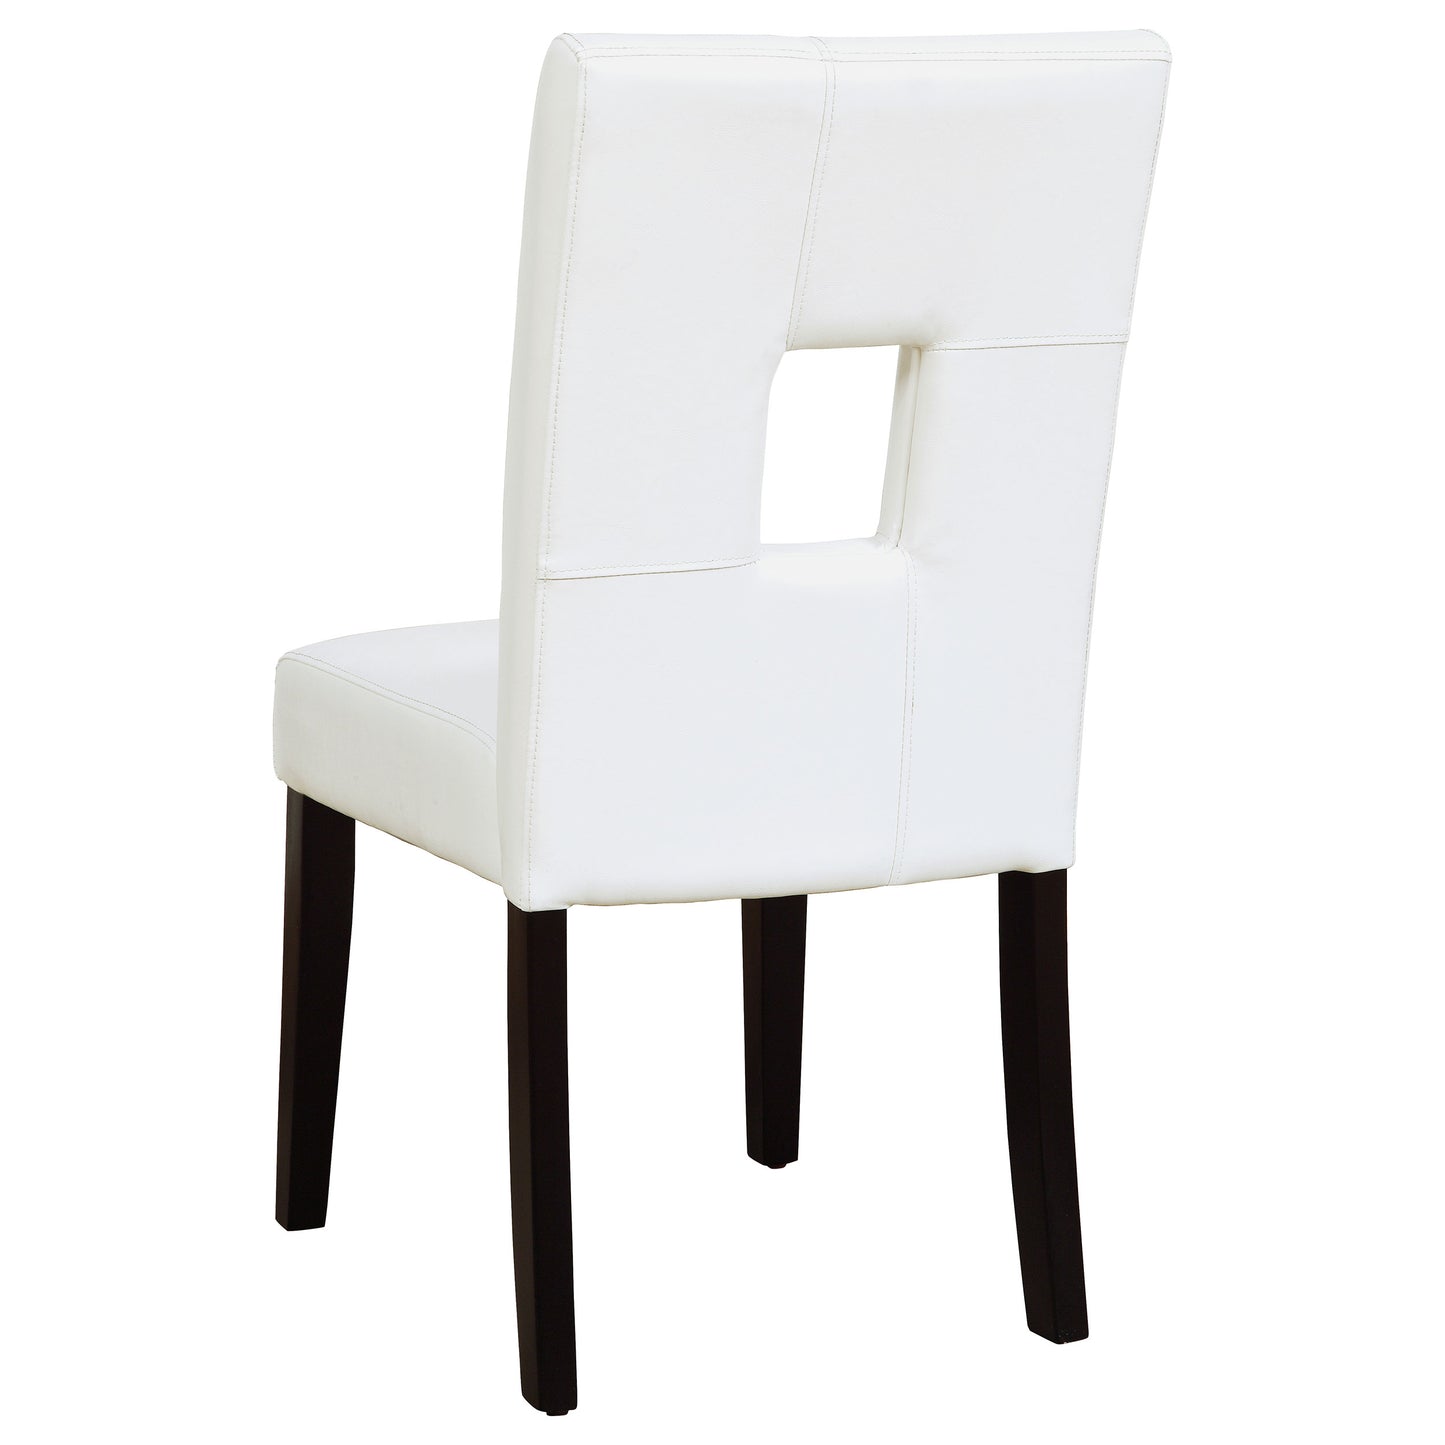 Shannon Open Back Upholstered Dining Chairs White (Set of 2)